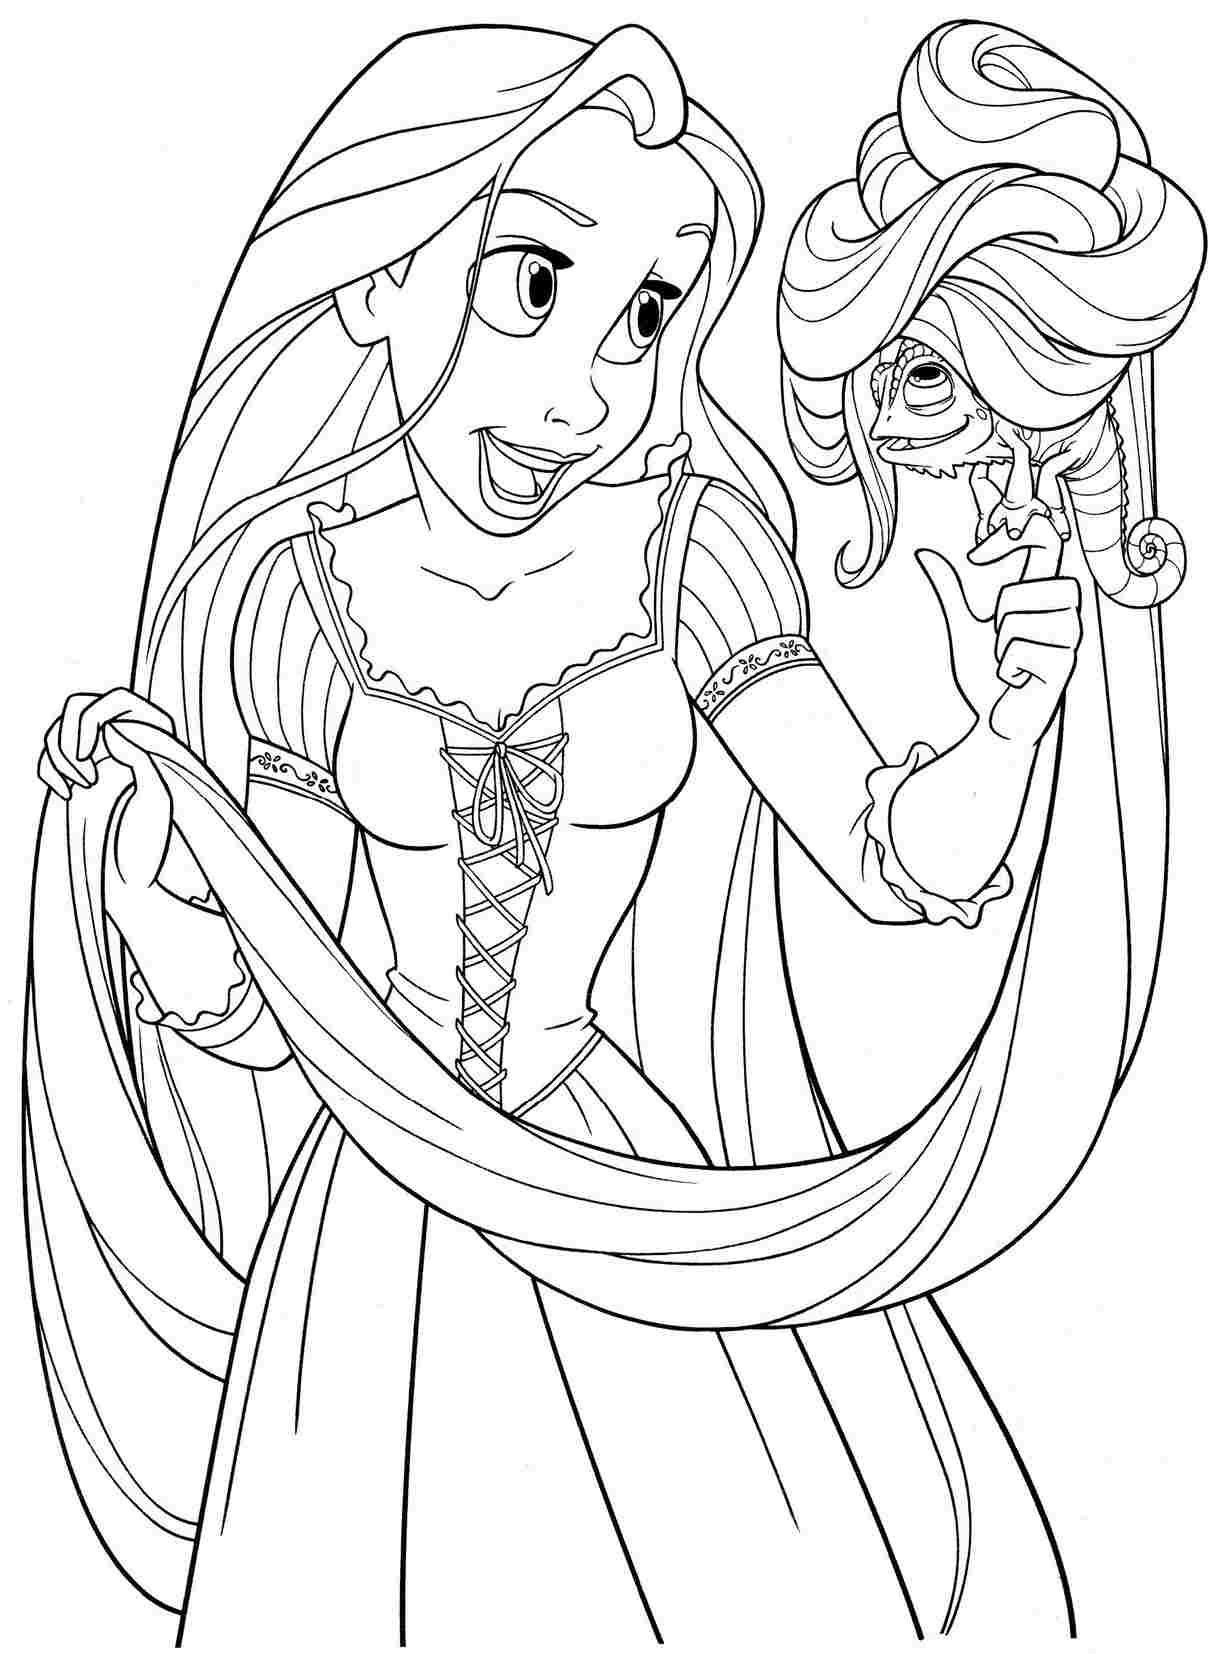 Princess Coloring Pages For Boys
 printable free colouring pages disney princess rapunzel